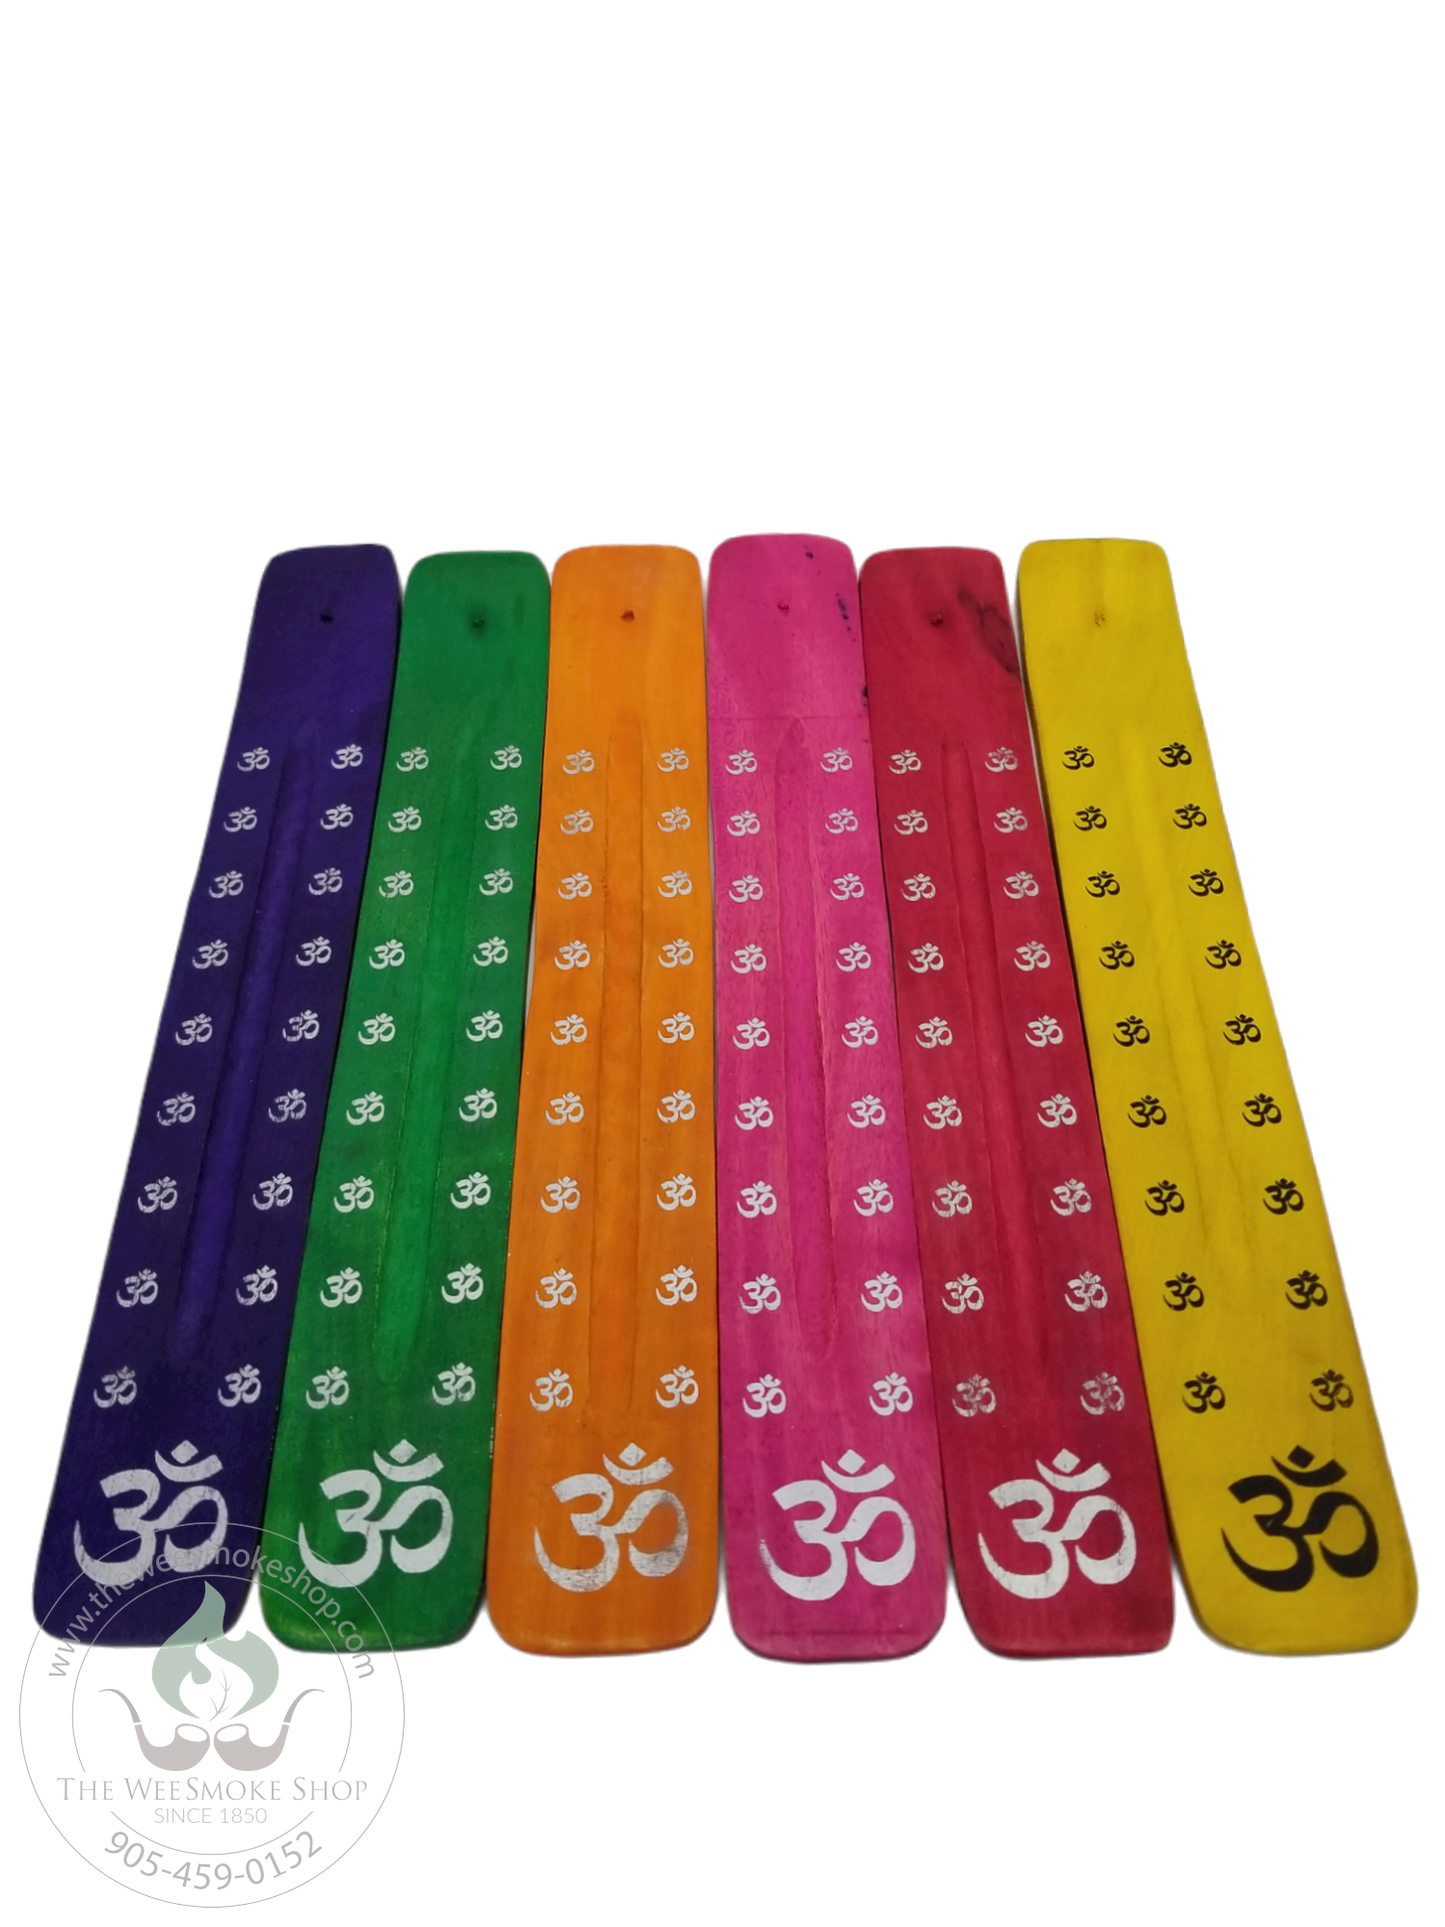 Colourful Wooden Om Incense Holder-incense-The Wee Smoke Shop